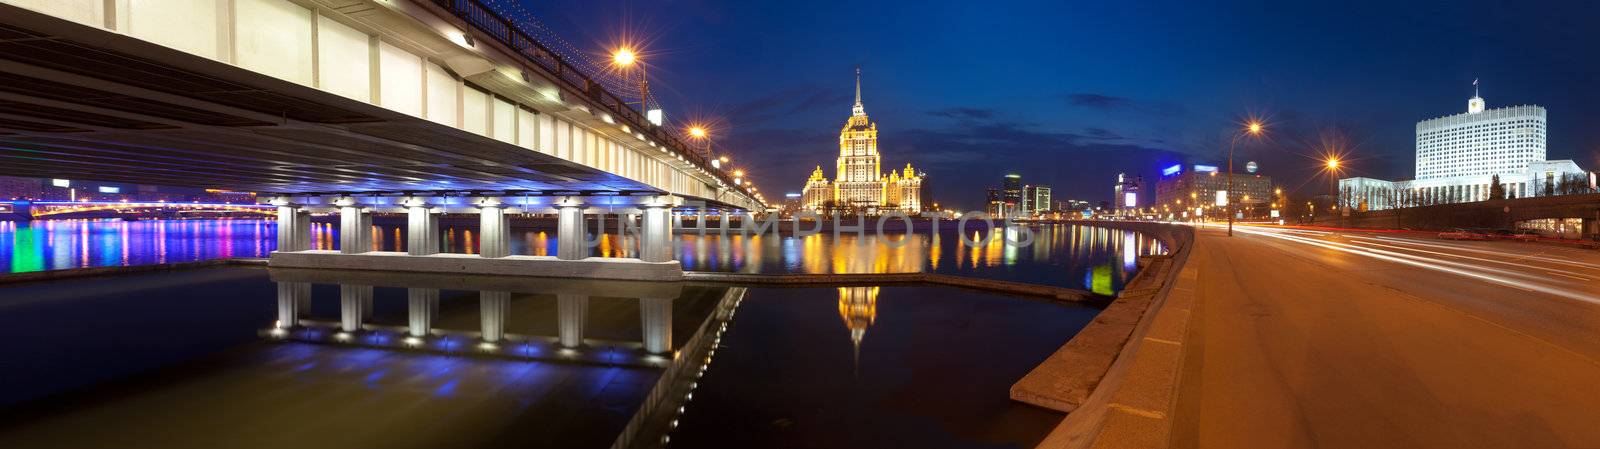  Night Moscow.  Moscow River. Hotel Ukraine and the House of Gov by vladimir_sklyarov